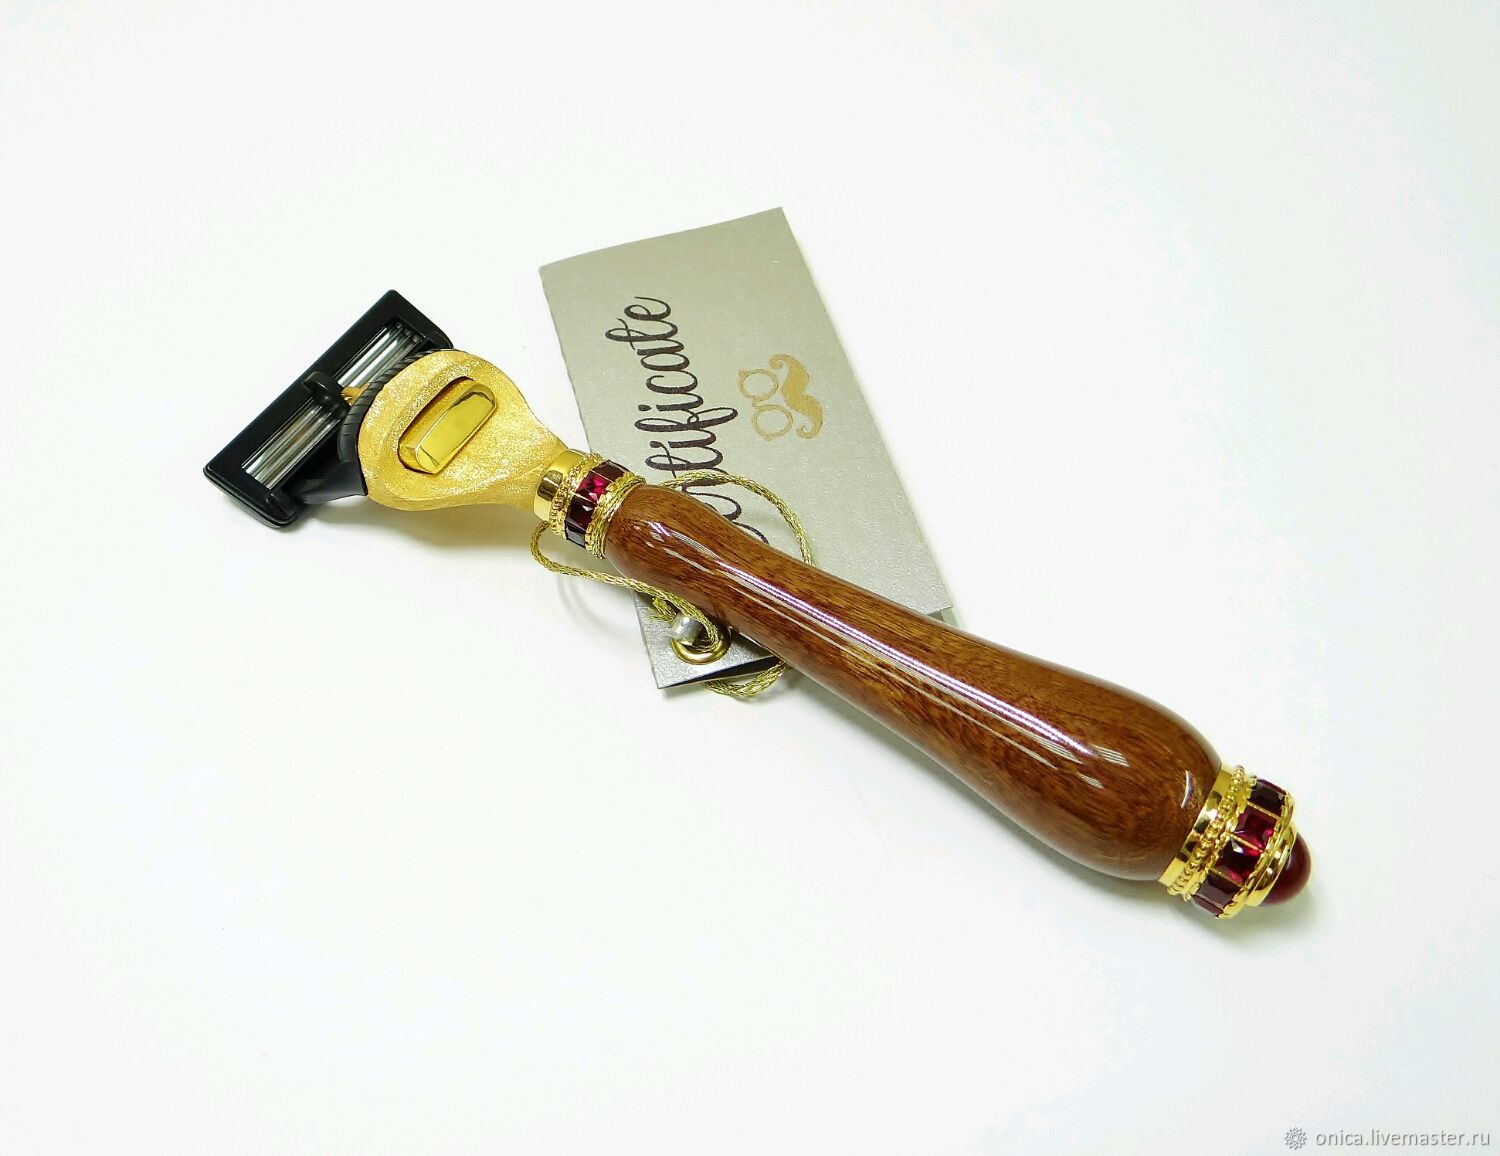 Expensive men's gift shaving machine, hand made natural iron wood. Mechanism and accessories razor is made of jewelry of bronze and gold - 24kt.
